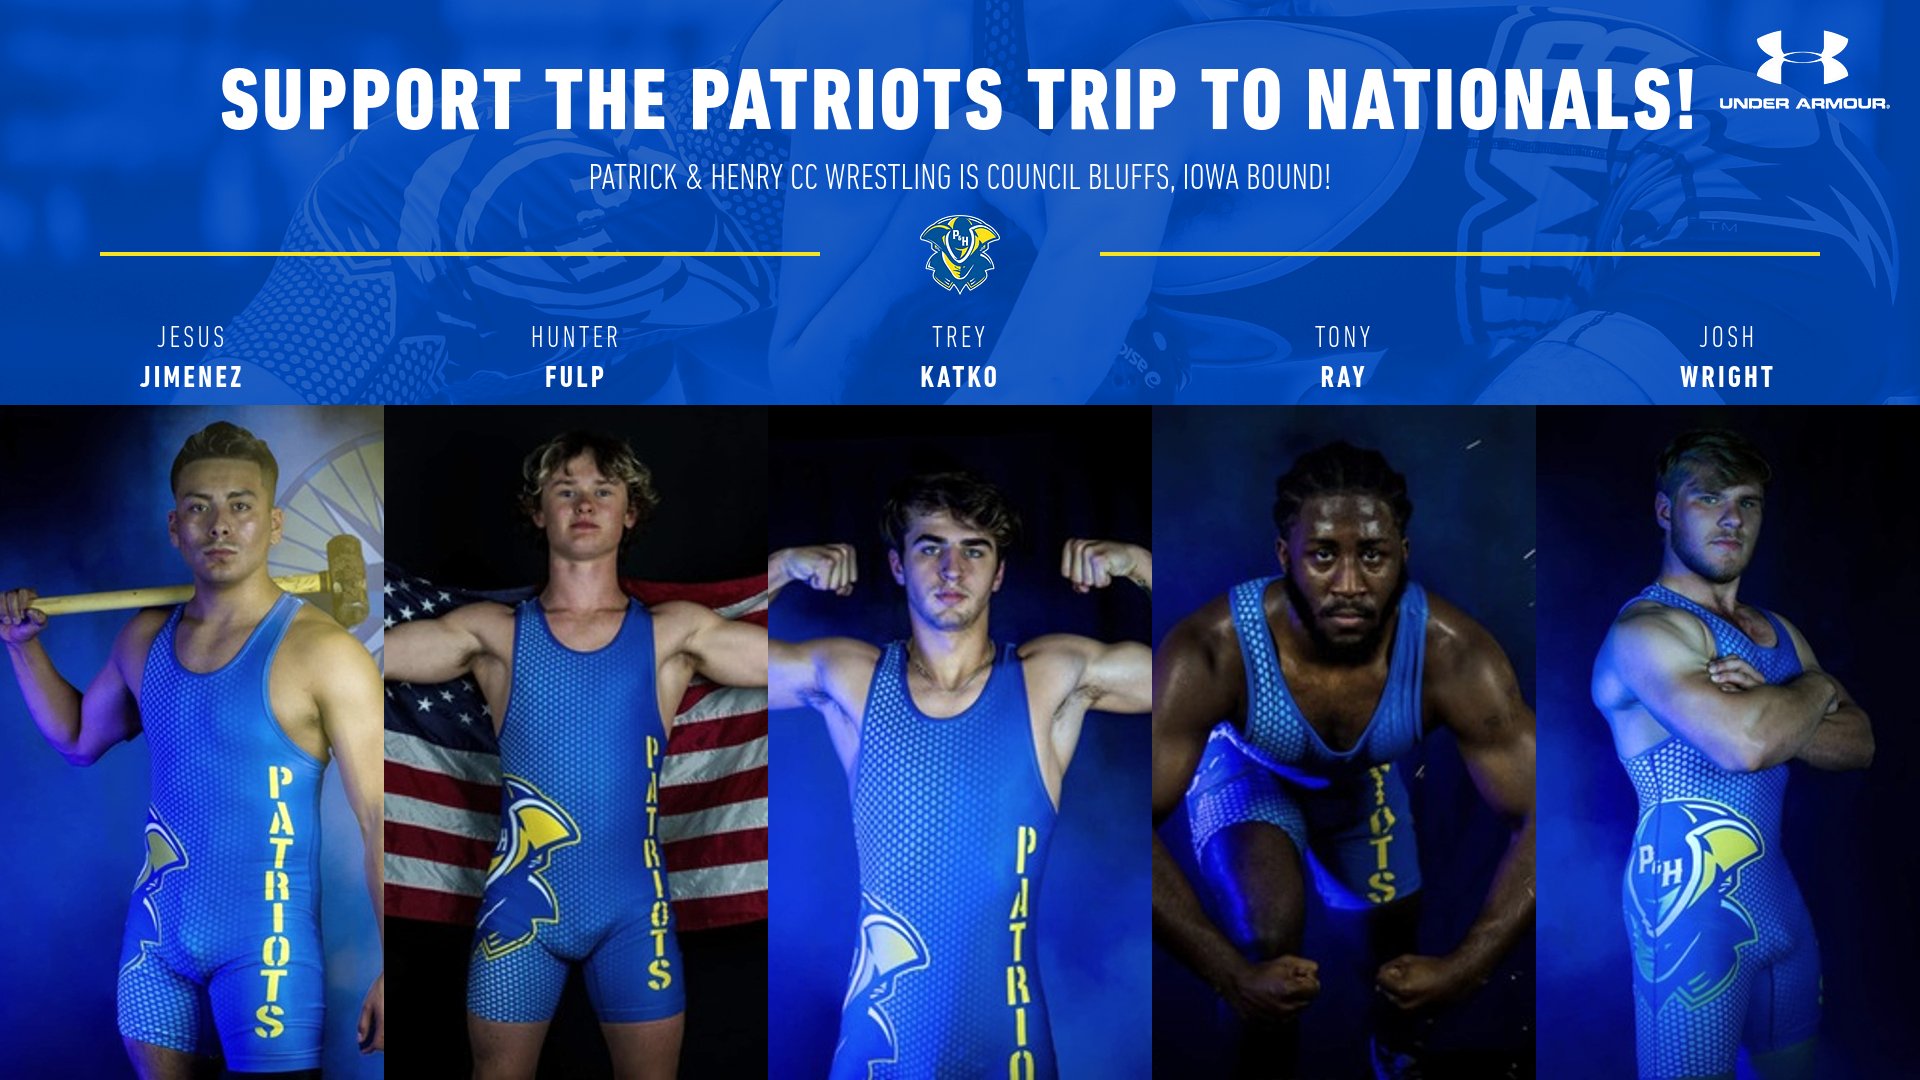 Five P&amp;HCC Wrestlers Qualify for Nationals In Council Bluffs, Iowa - Support the Patriots!